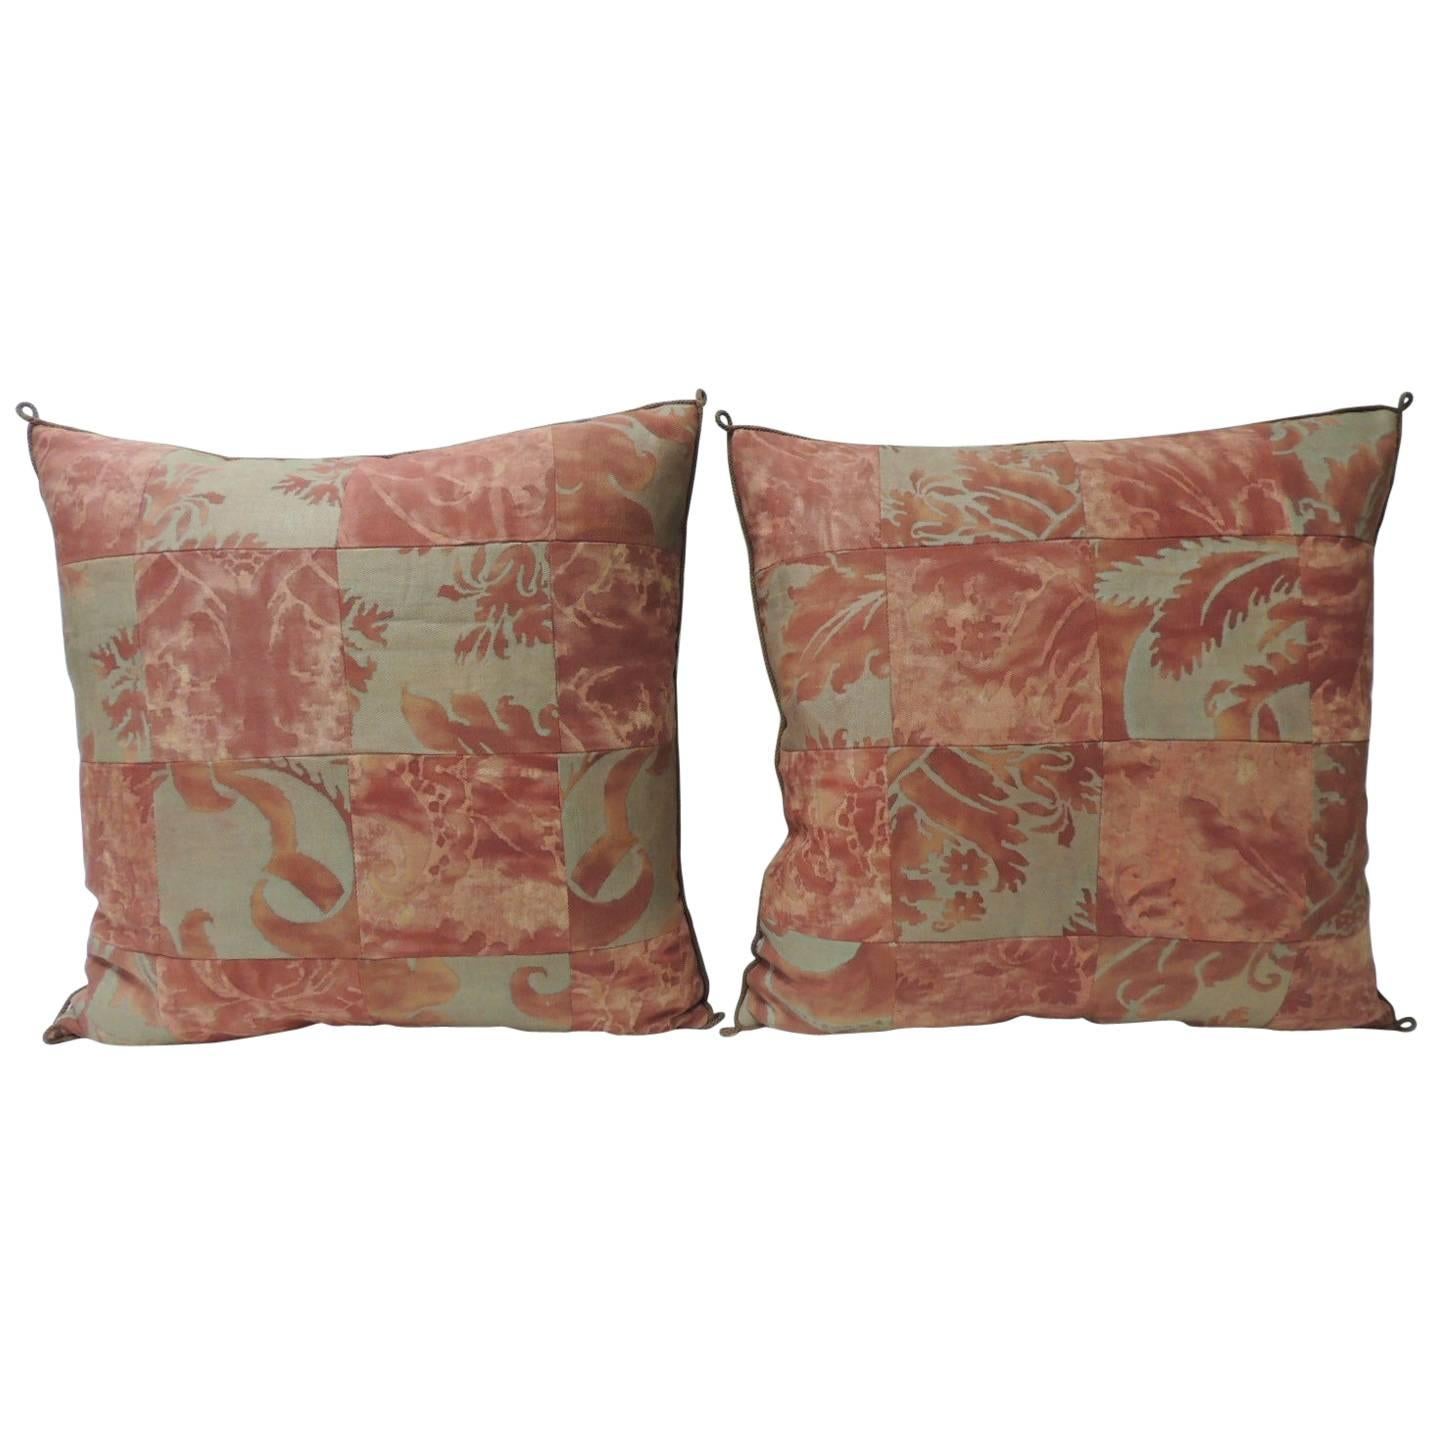 Pair of Vintage Patchwork Fortuny “Glicine” Pattern Red and Silvery Pillows